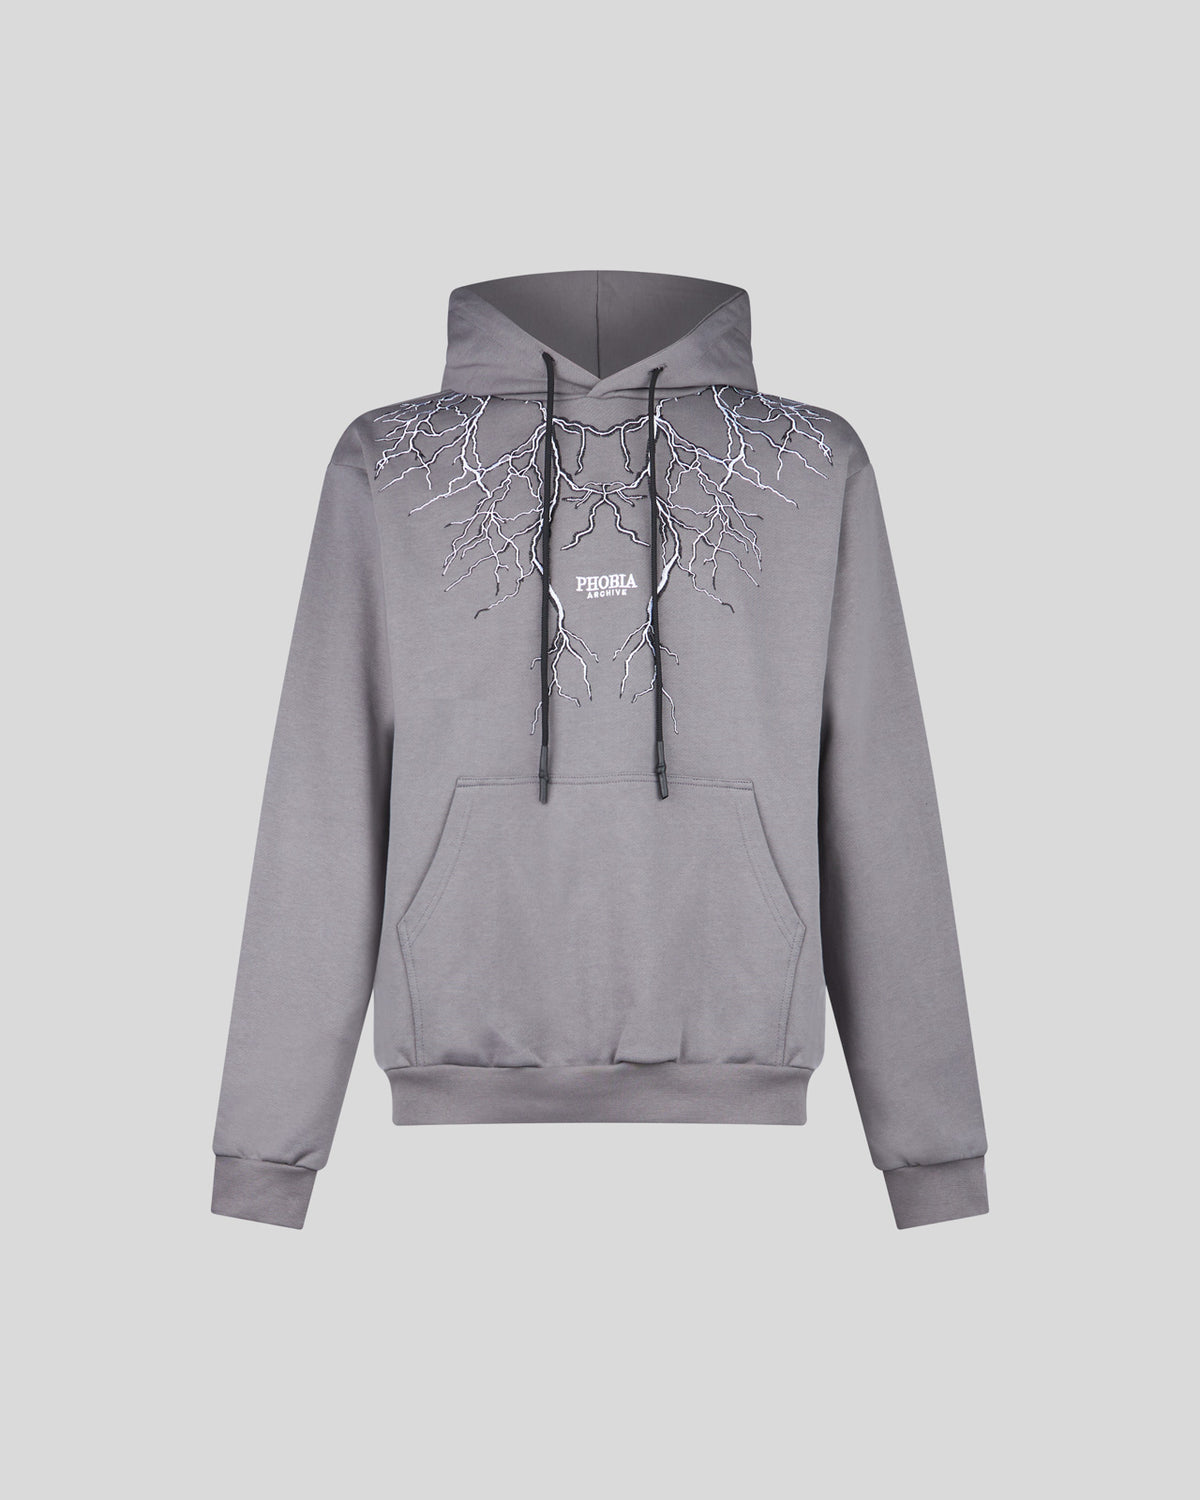 PHOBIA GREY HOODIE WITH WHITE EMBROIDERY LIGHTNING